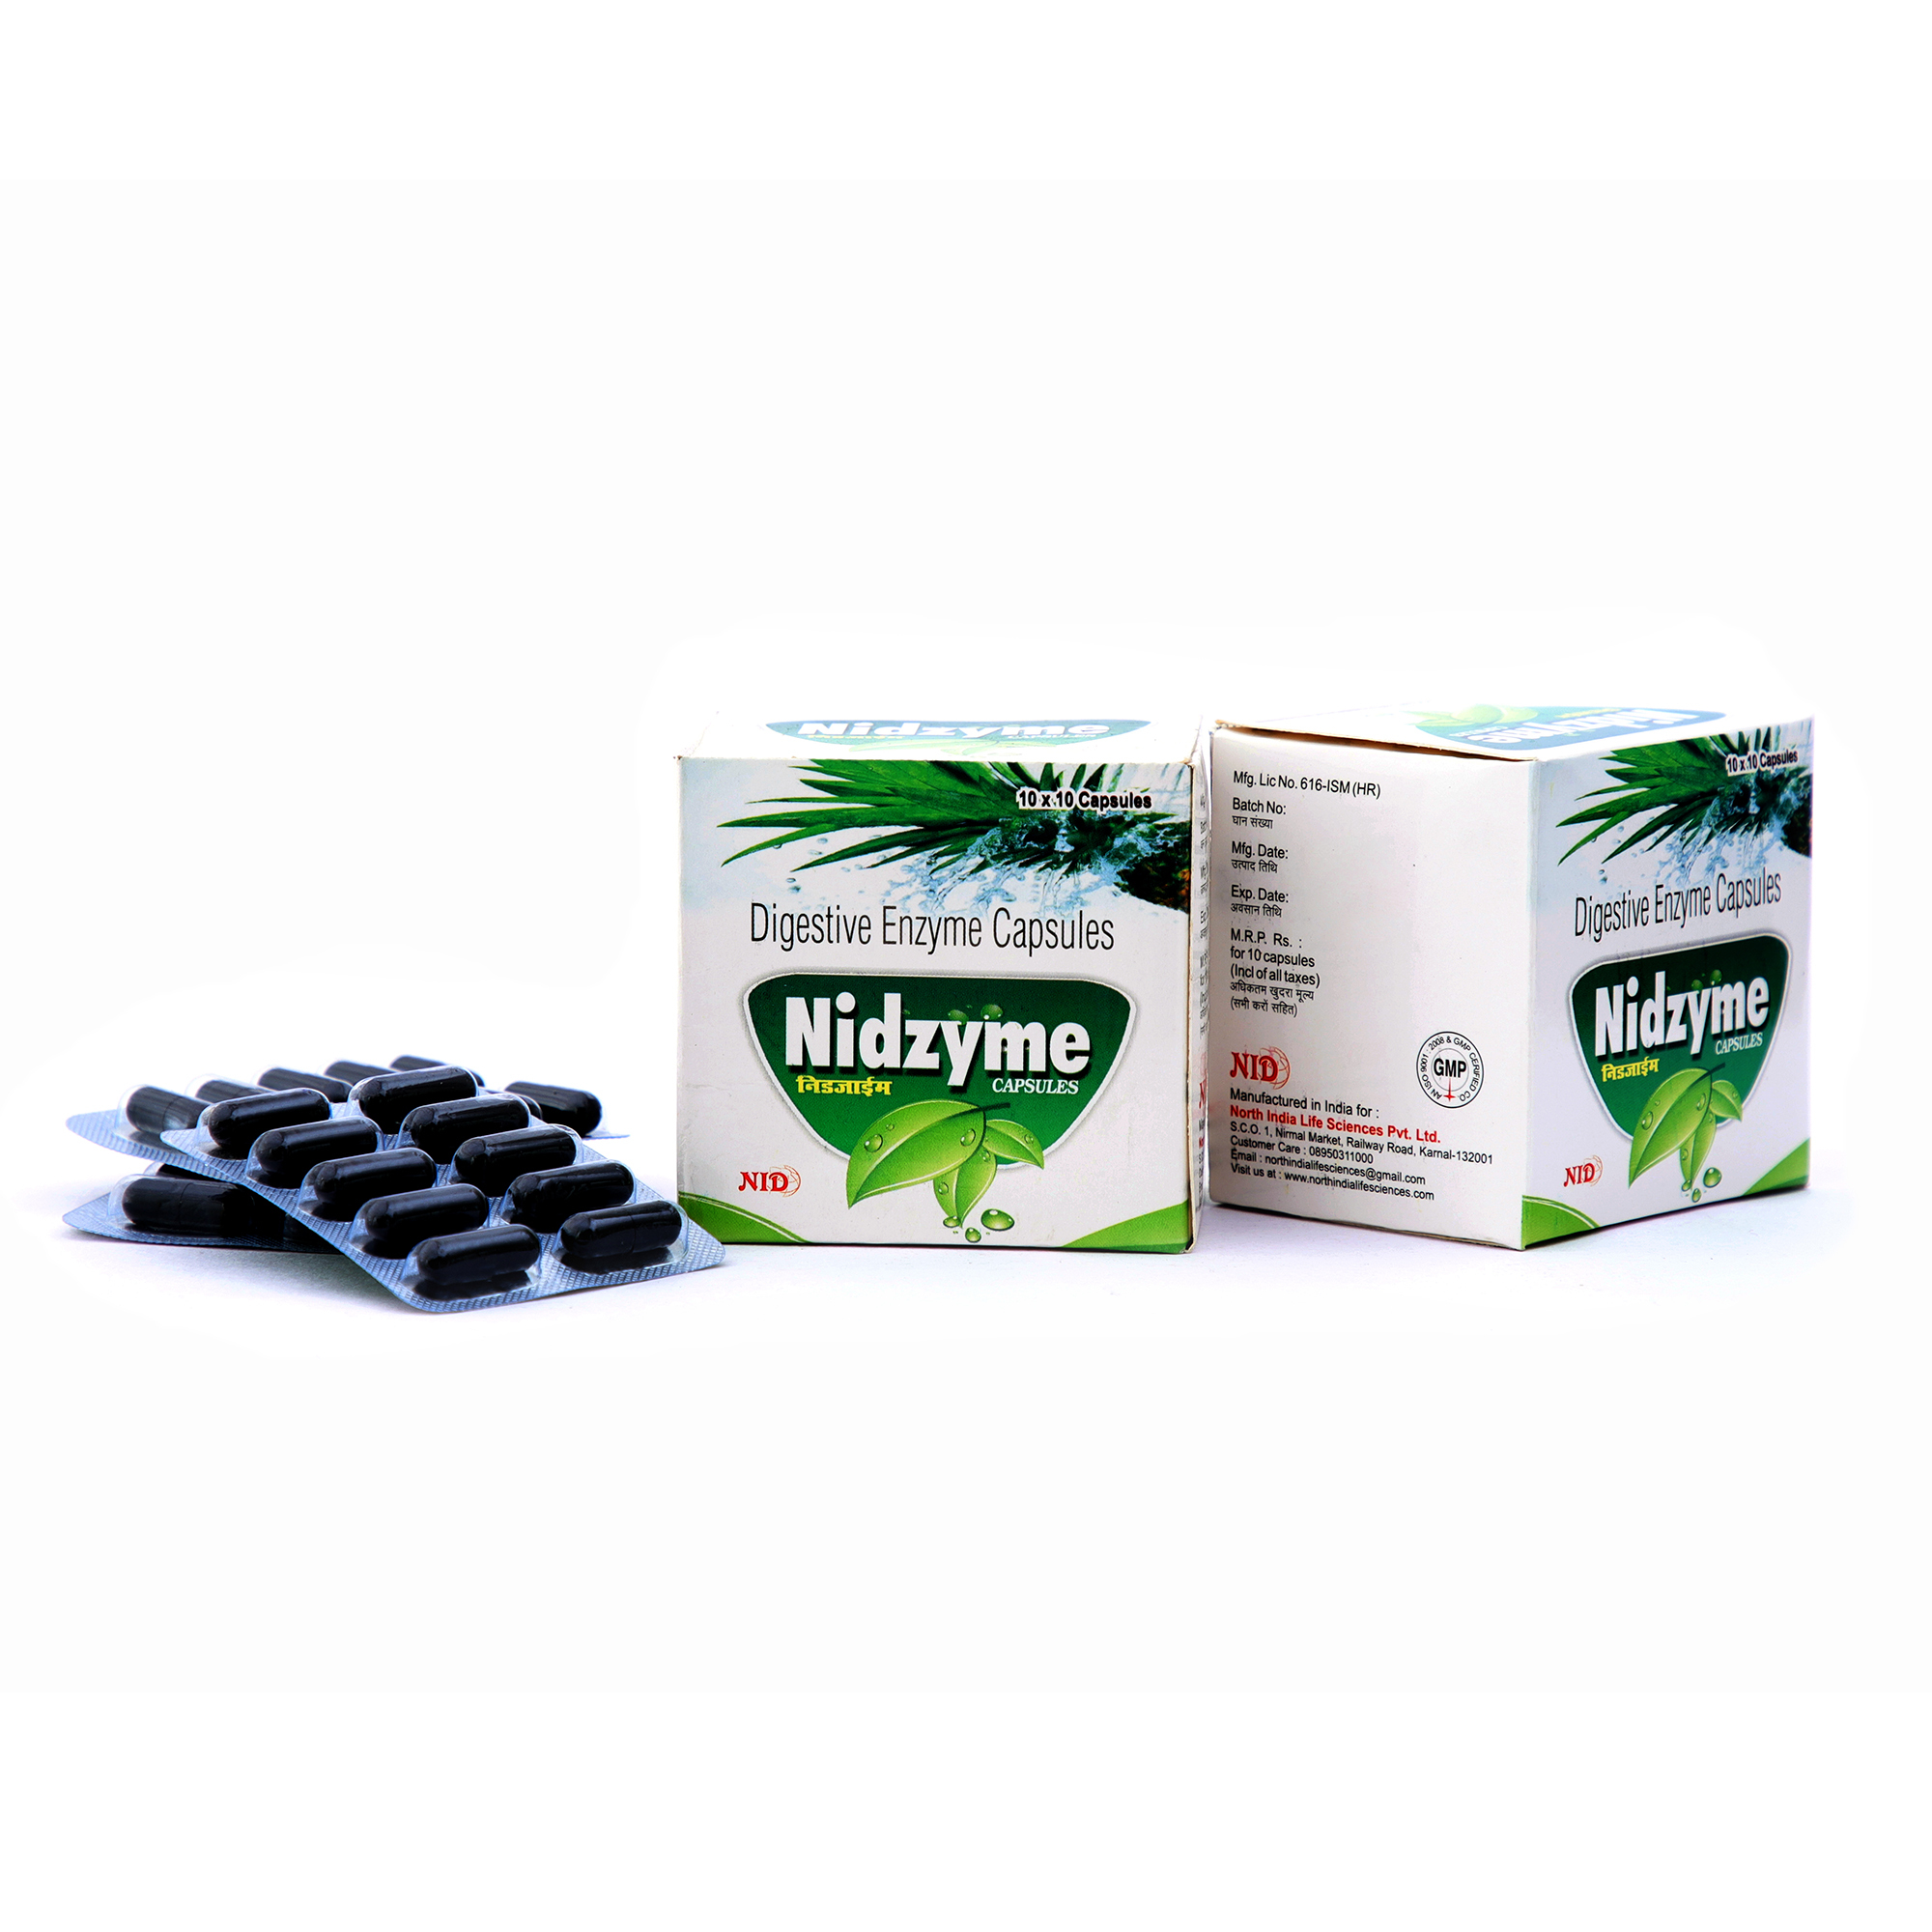 Digestive Enzyme capsules